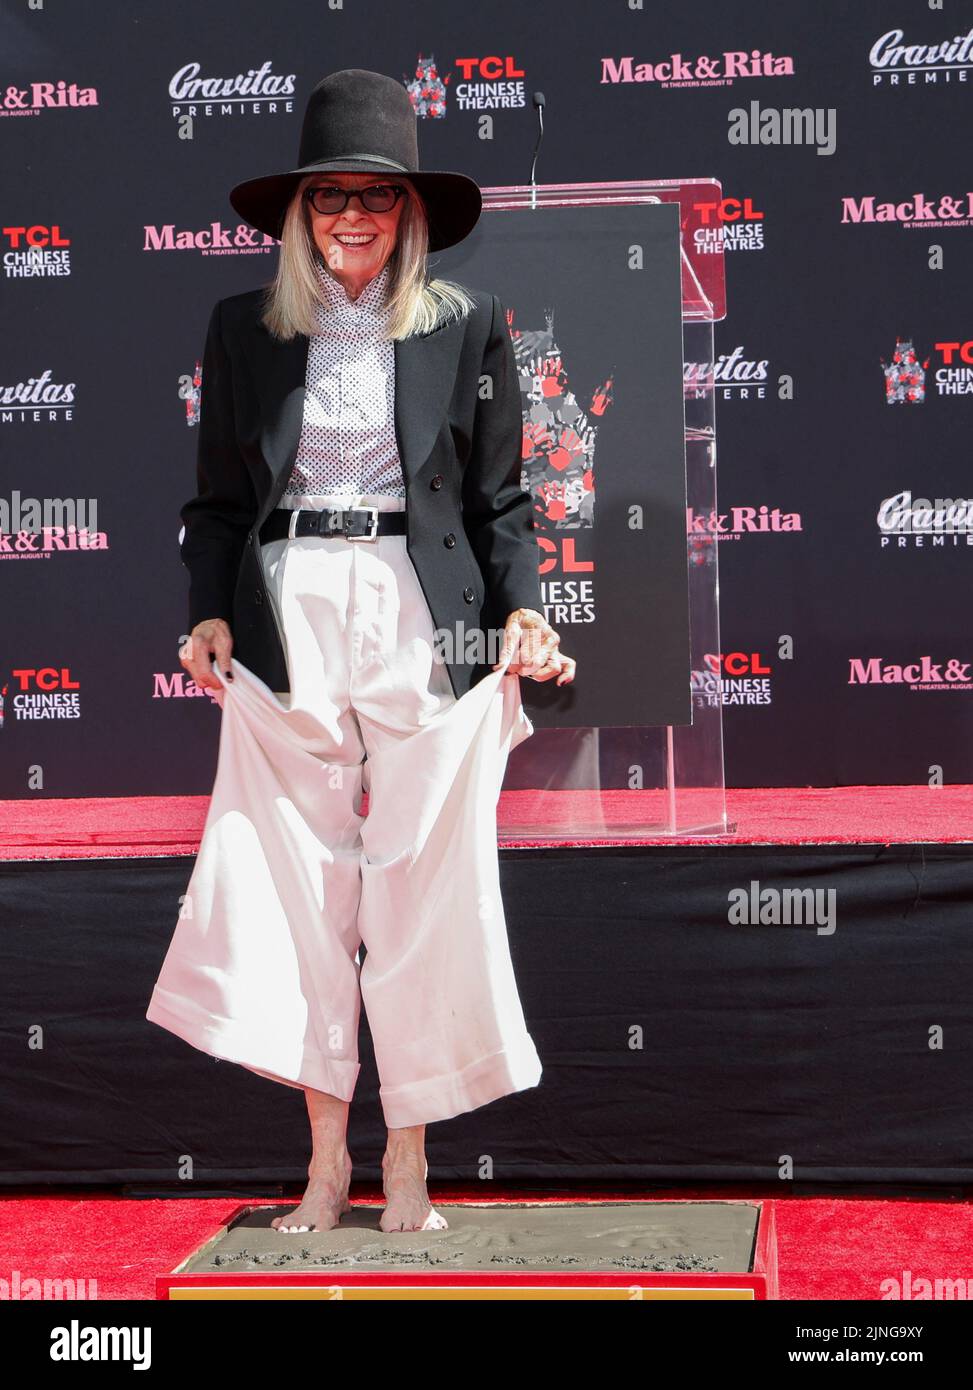 Actor Diane Keaton smiles as she places her footprints in cement during a ceremony TCL Chinese theatre in Los Angeles, California, U.S., August 11, 2022. REUTERS/Mario Anzuoni Stock Photo